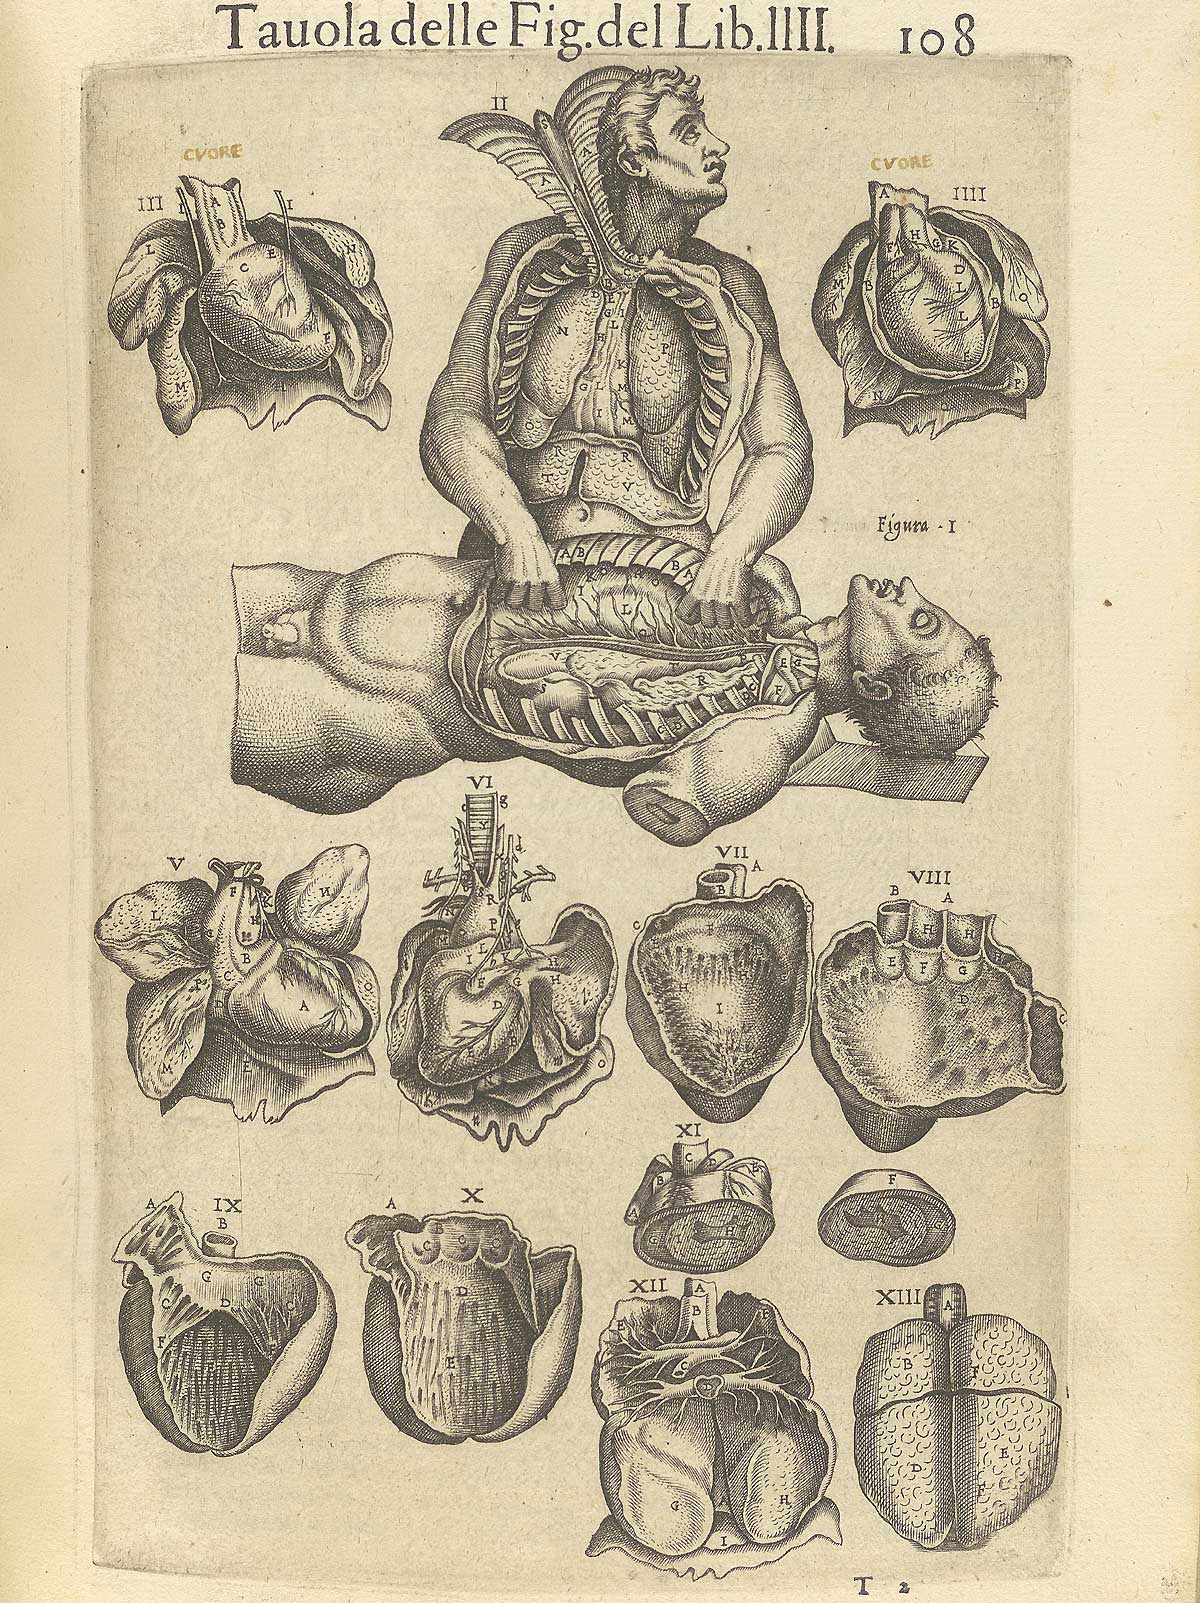 Page 108 of Juan Valverde de Amusco's Anatomia del corpo humano, featuring a cadaver with its fingers in another cadaver. Around the two cadavers are images of the heart.